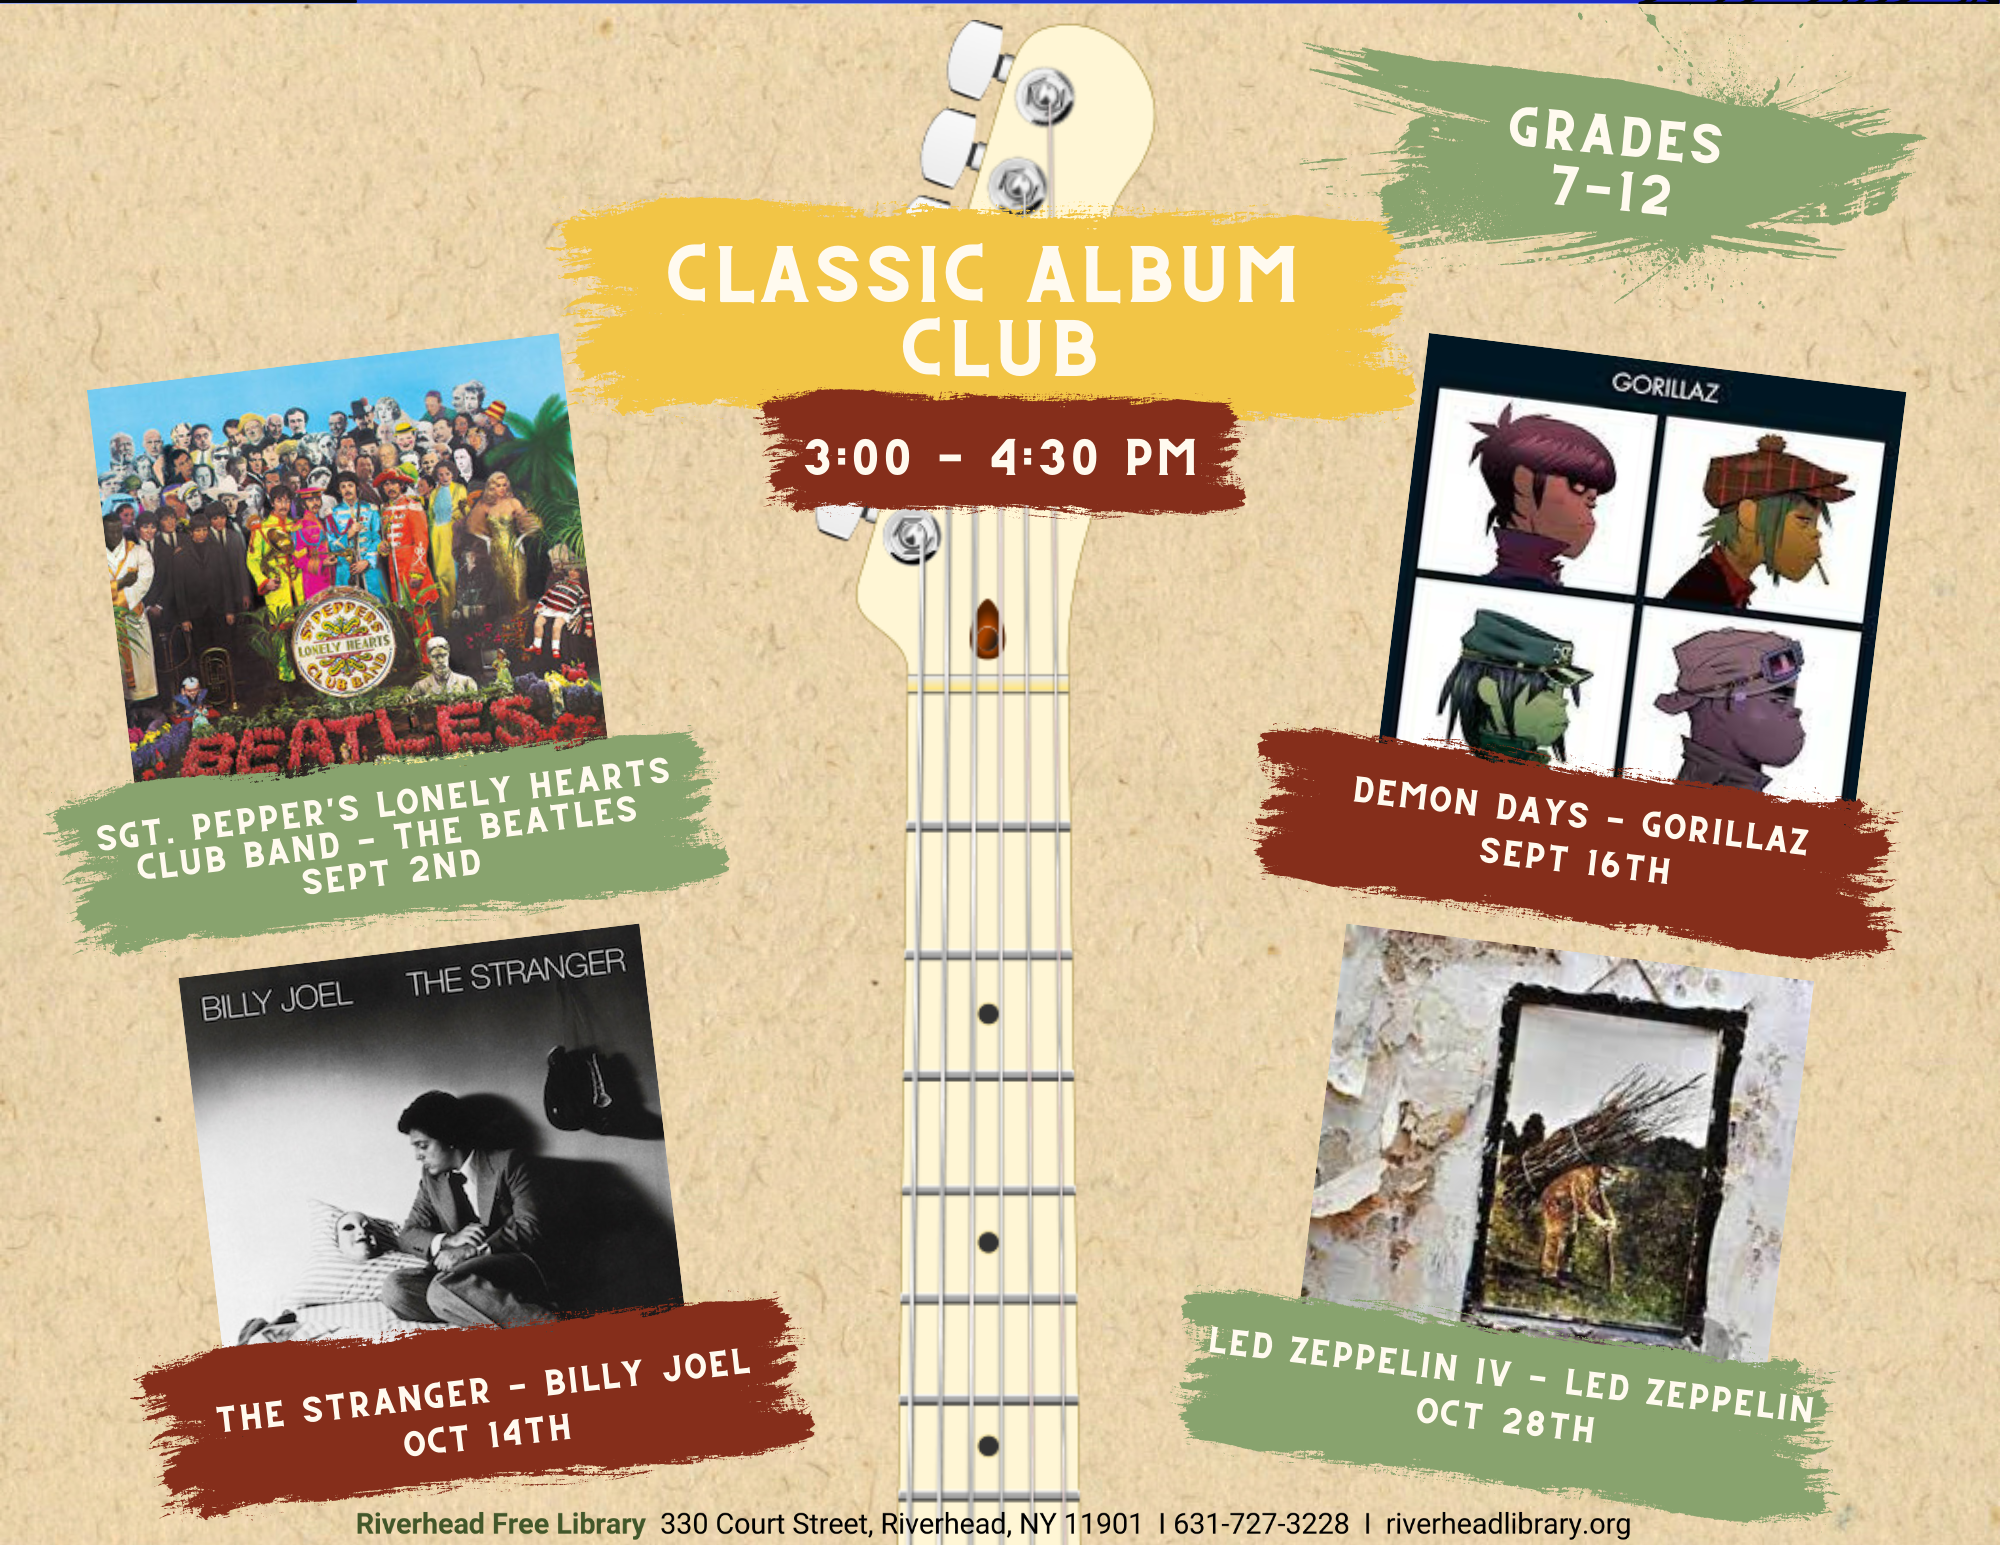 Program flyer featuring the following text, "Classic Album Club. Grades 7-12. 3:00-4:30pm. September 2nd (Sgt. Pepper's Lonely Heart Club Band - The Beetles), September 16th (Demon Days - Gorillaz), October 14th (The Stranger - Billy Joel), & October 28th (Led Zeppelin IV - Led Zeppelin)."